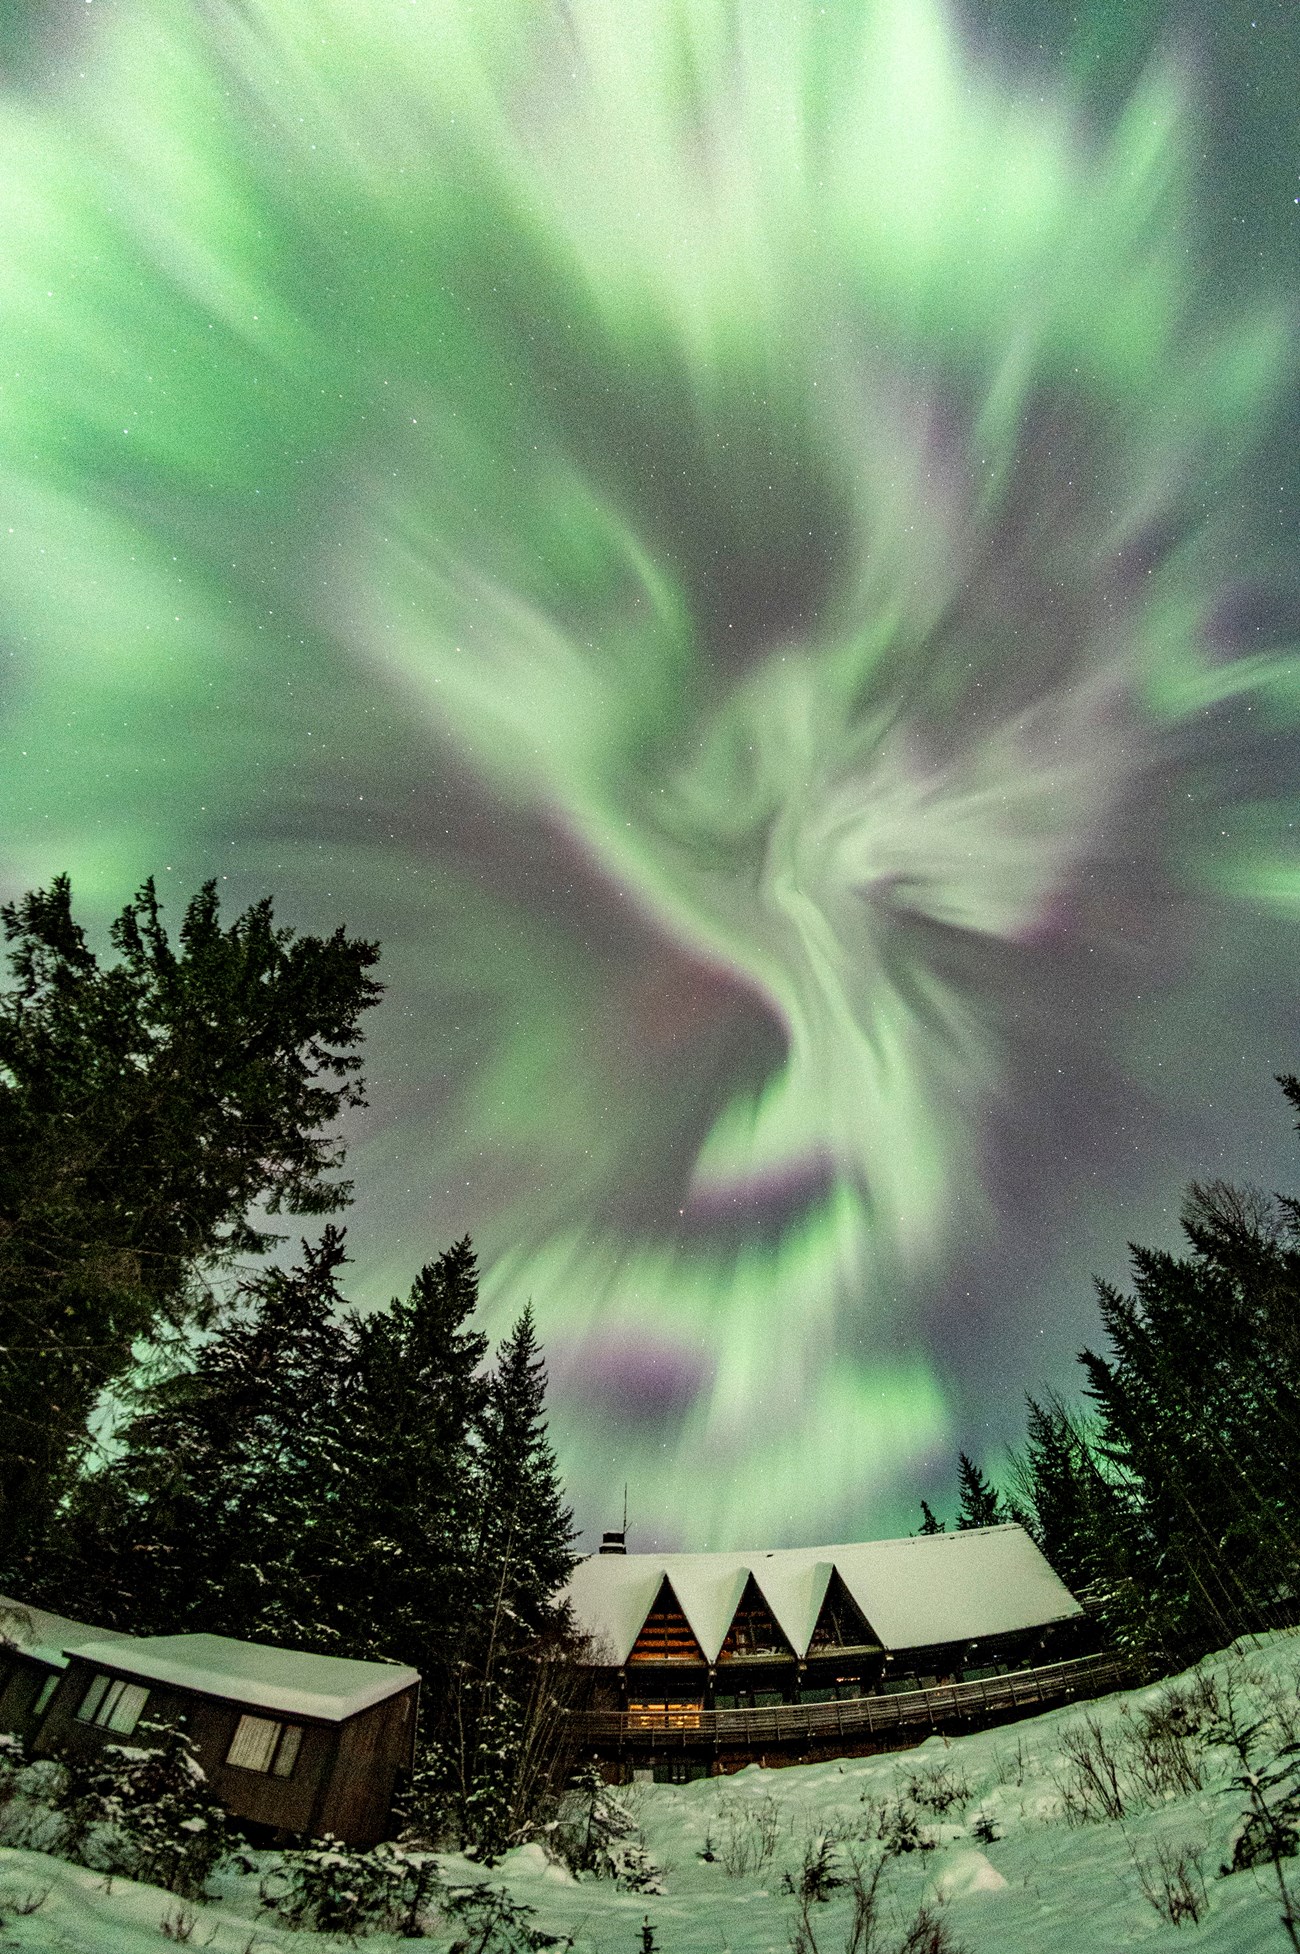 Green lights of the aurora borealis form spiraling abstract shapes in the sky above the snow-covered Glacier Bay Lodge.